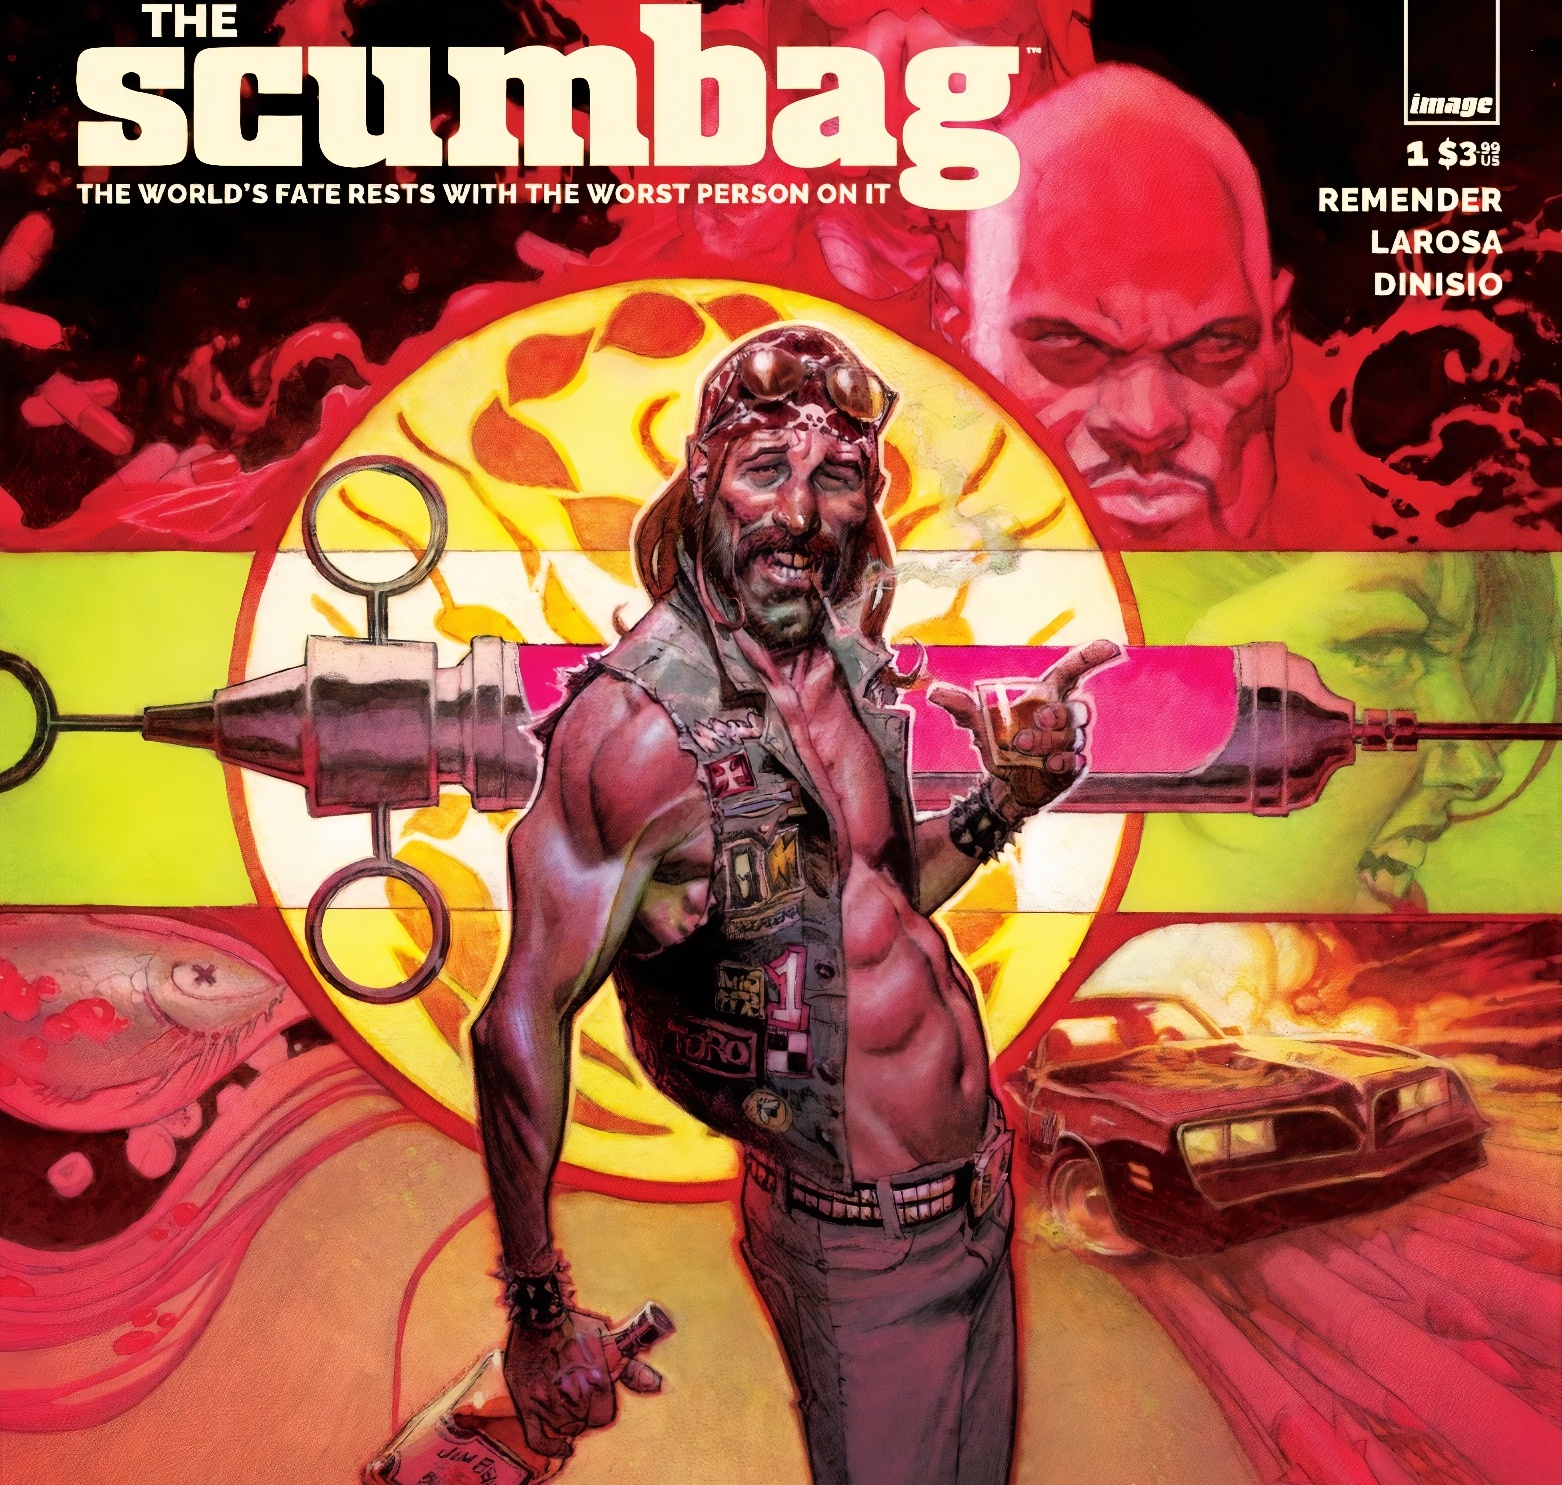 Image Comics announces Rick Remender's 'The Scumbag' for October 2020 release